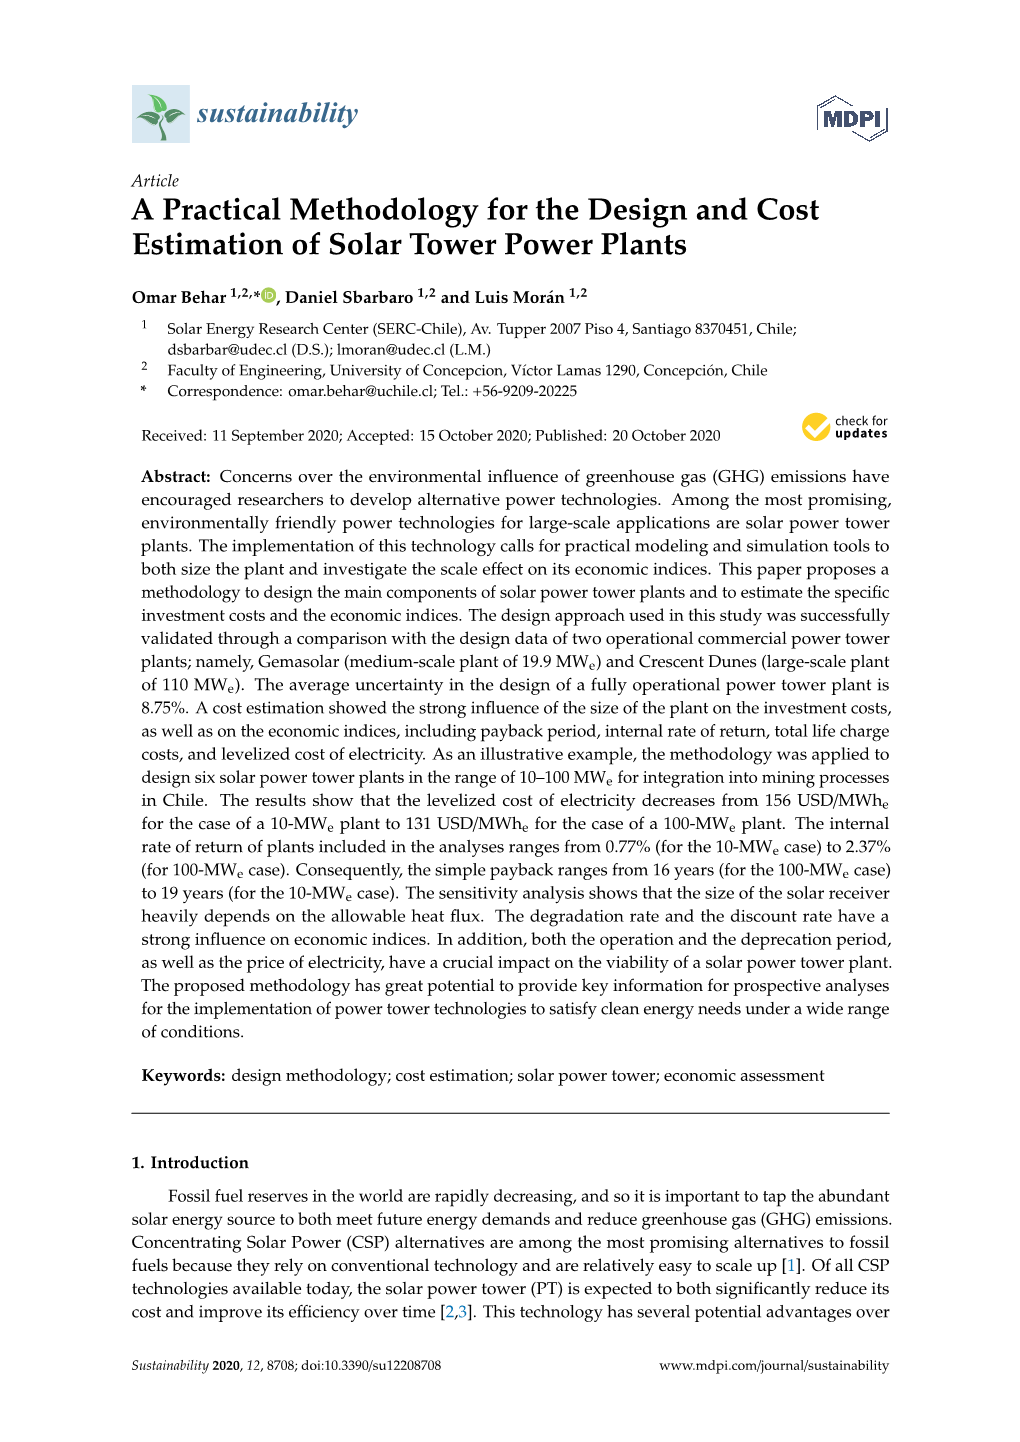 A Practical Methodology for the Design and Cost Estimation of Solar Tower Power Plants